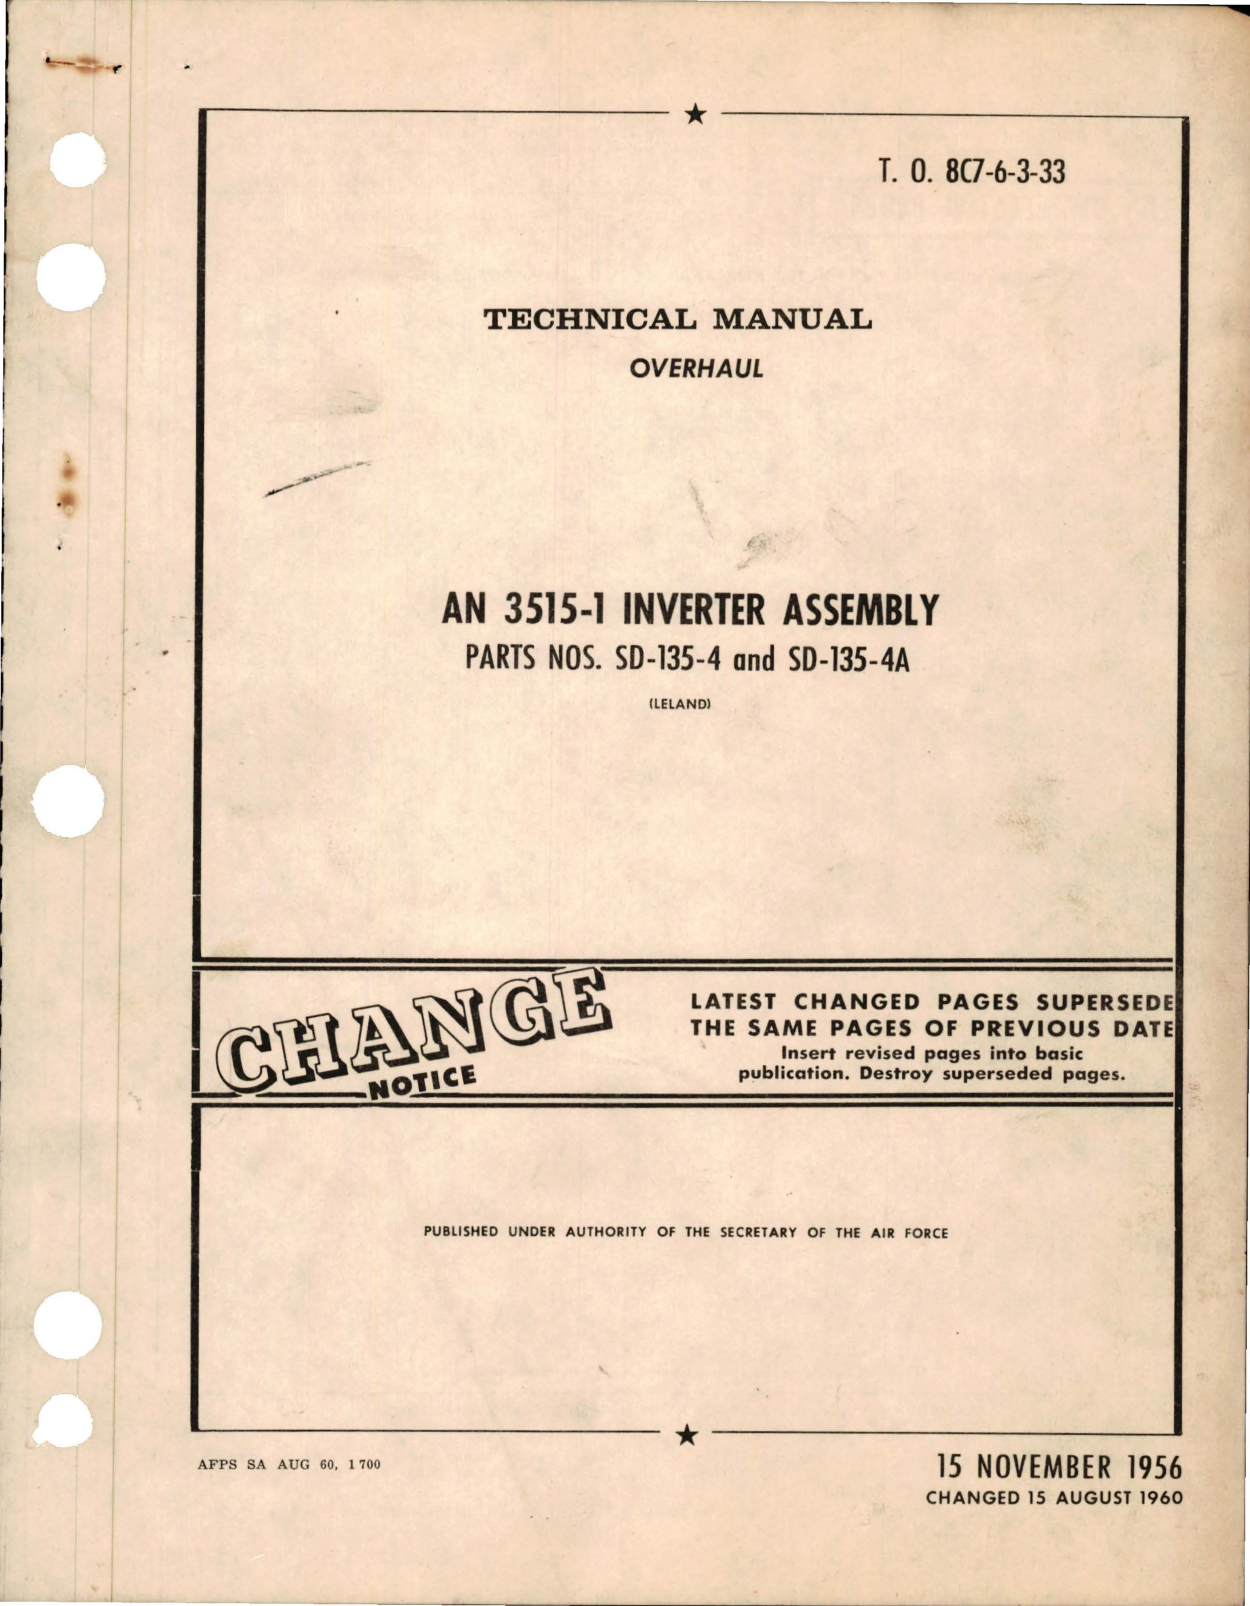 Sample page 1 from AirCorps Library document: Overhaul for Inverter Assembly - AN 3515-1 - Parts SD-135-4 and SD-135-4A